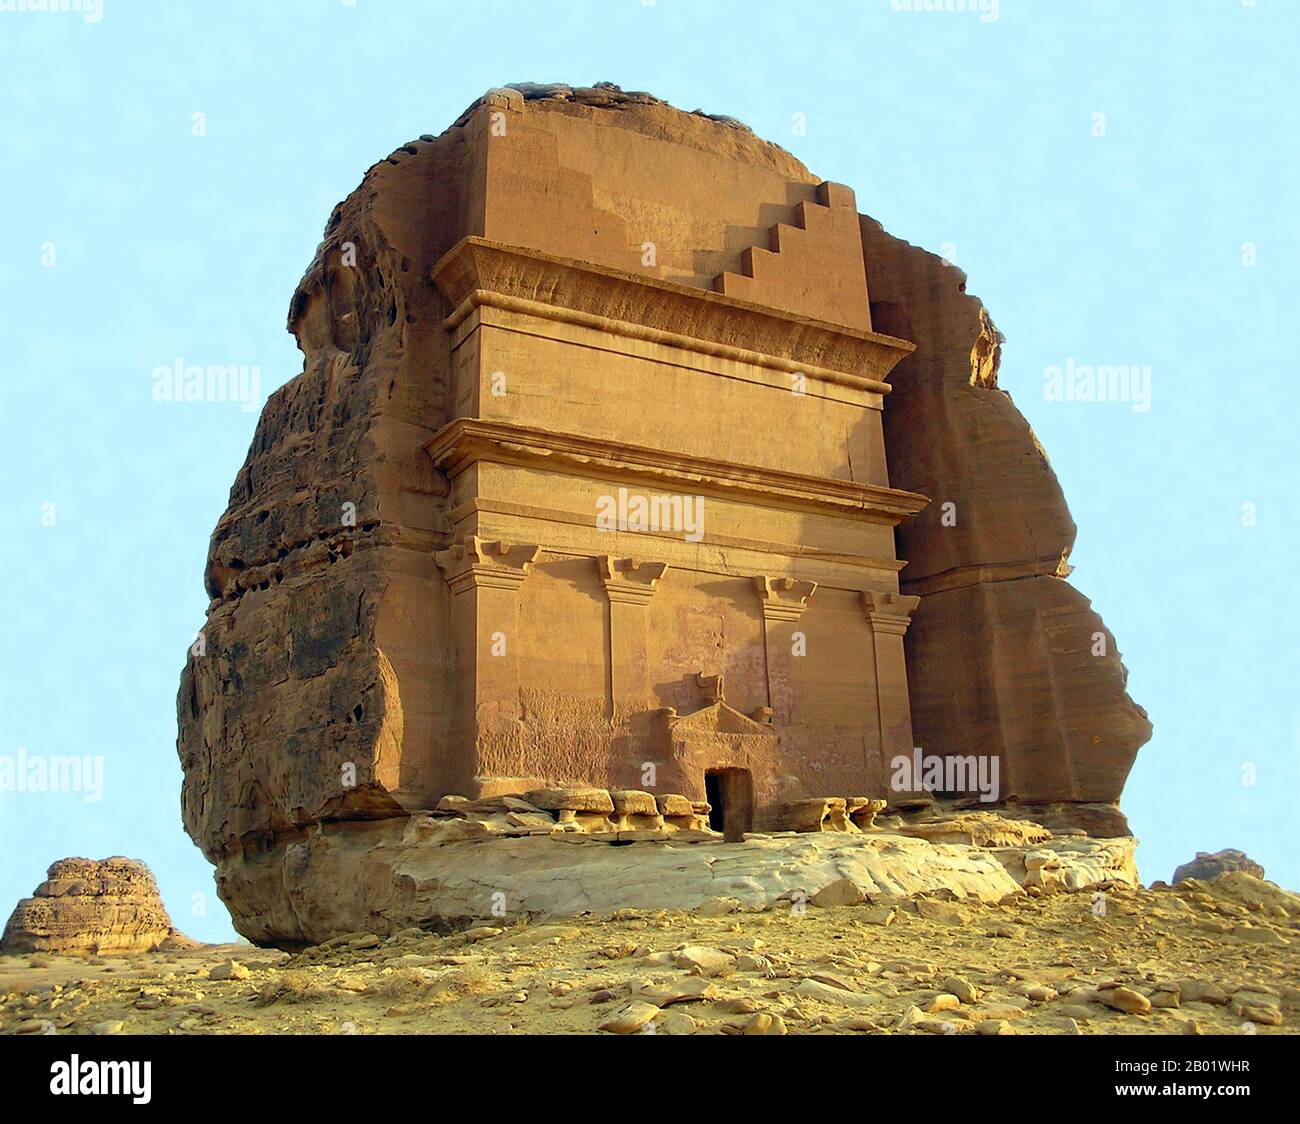 Saudi Arabia: Nabataean rock-hewn ruins of Mada'in Saleh, Saudi Arabia, proclaimed a UNESCO World Heritage Site in 2008.  Mada'in Saleh, also called Al-Hijr or Hegra, is a pre-Islamic archaeological site located in the Al-Ula sector, within the Al Madinah Region of Saudi Arabia. A majority of the vestiges date from the Nabataean kingdom (1st century CE). The site constitutes the kingdom's southernmost and largest settlement after Petra, its capital. Traces of Lihyanite and Roman occupation before and after the Nabataean rule, respectively, can also be found in situ. Stock Photo